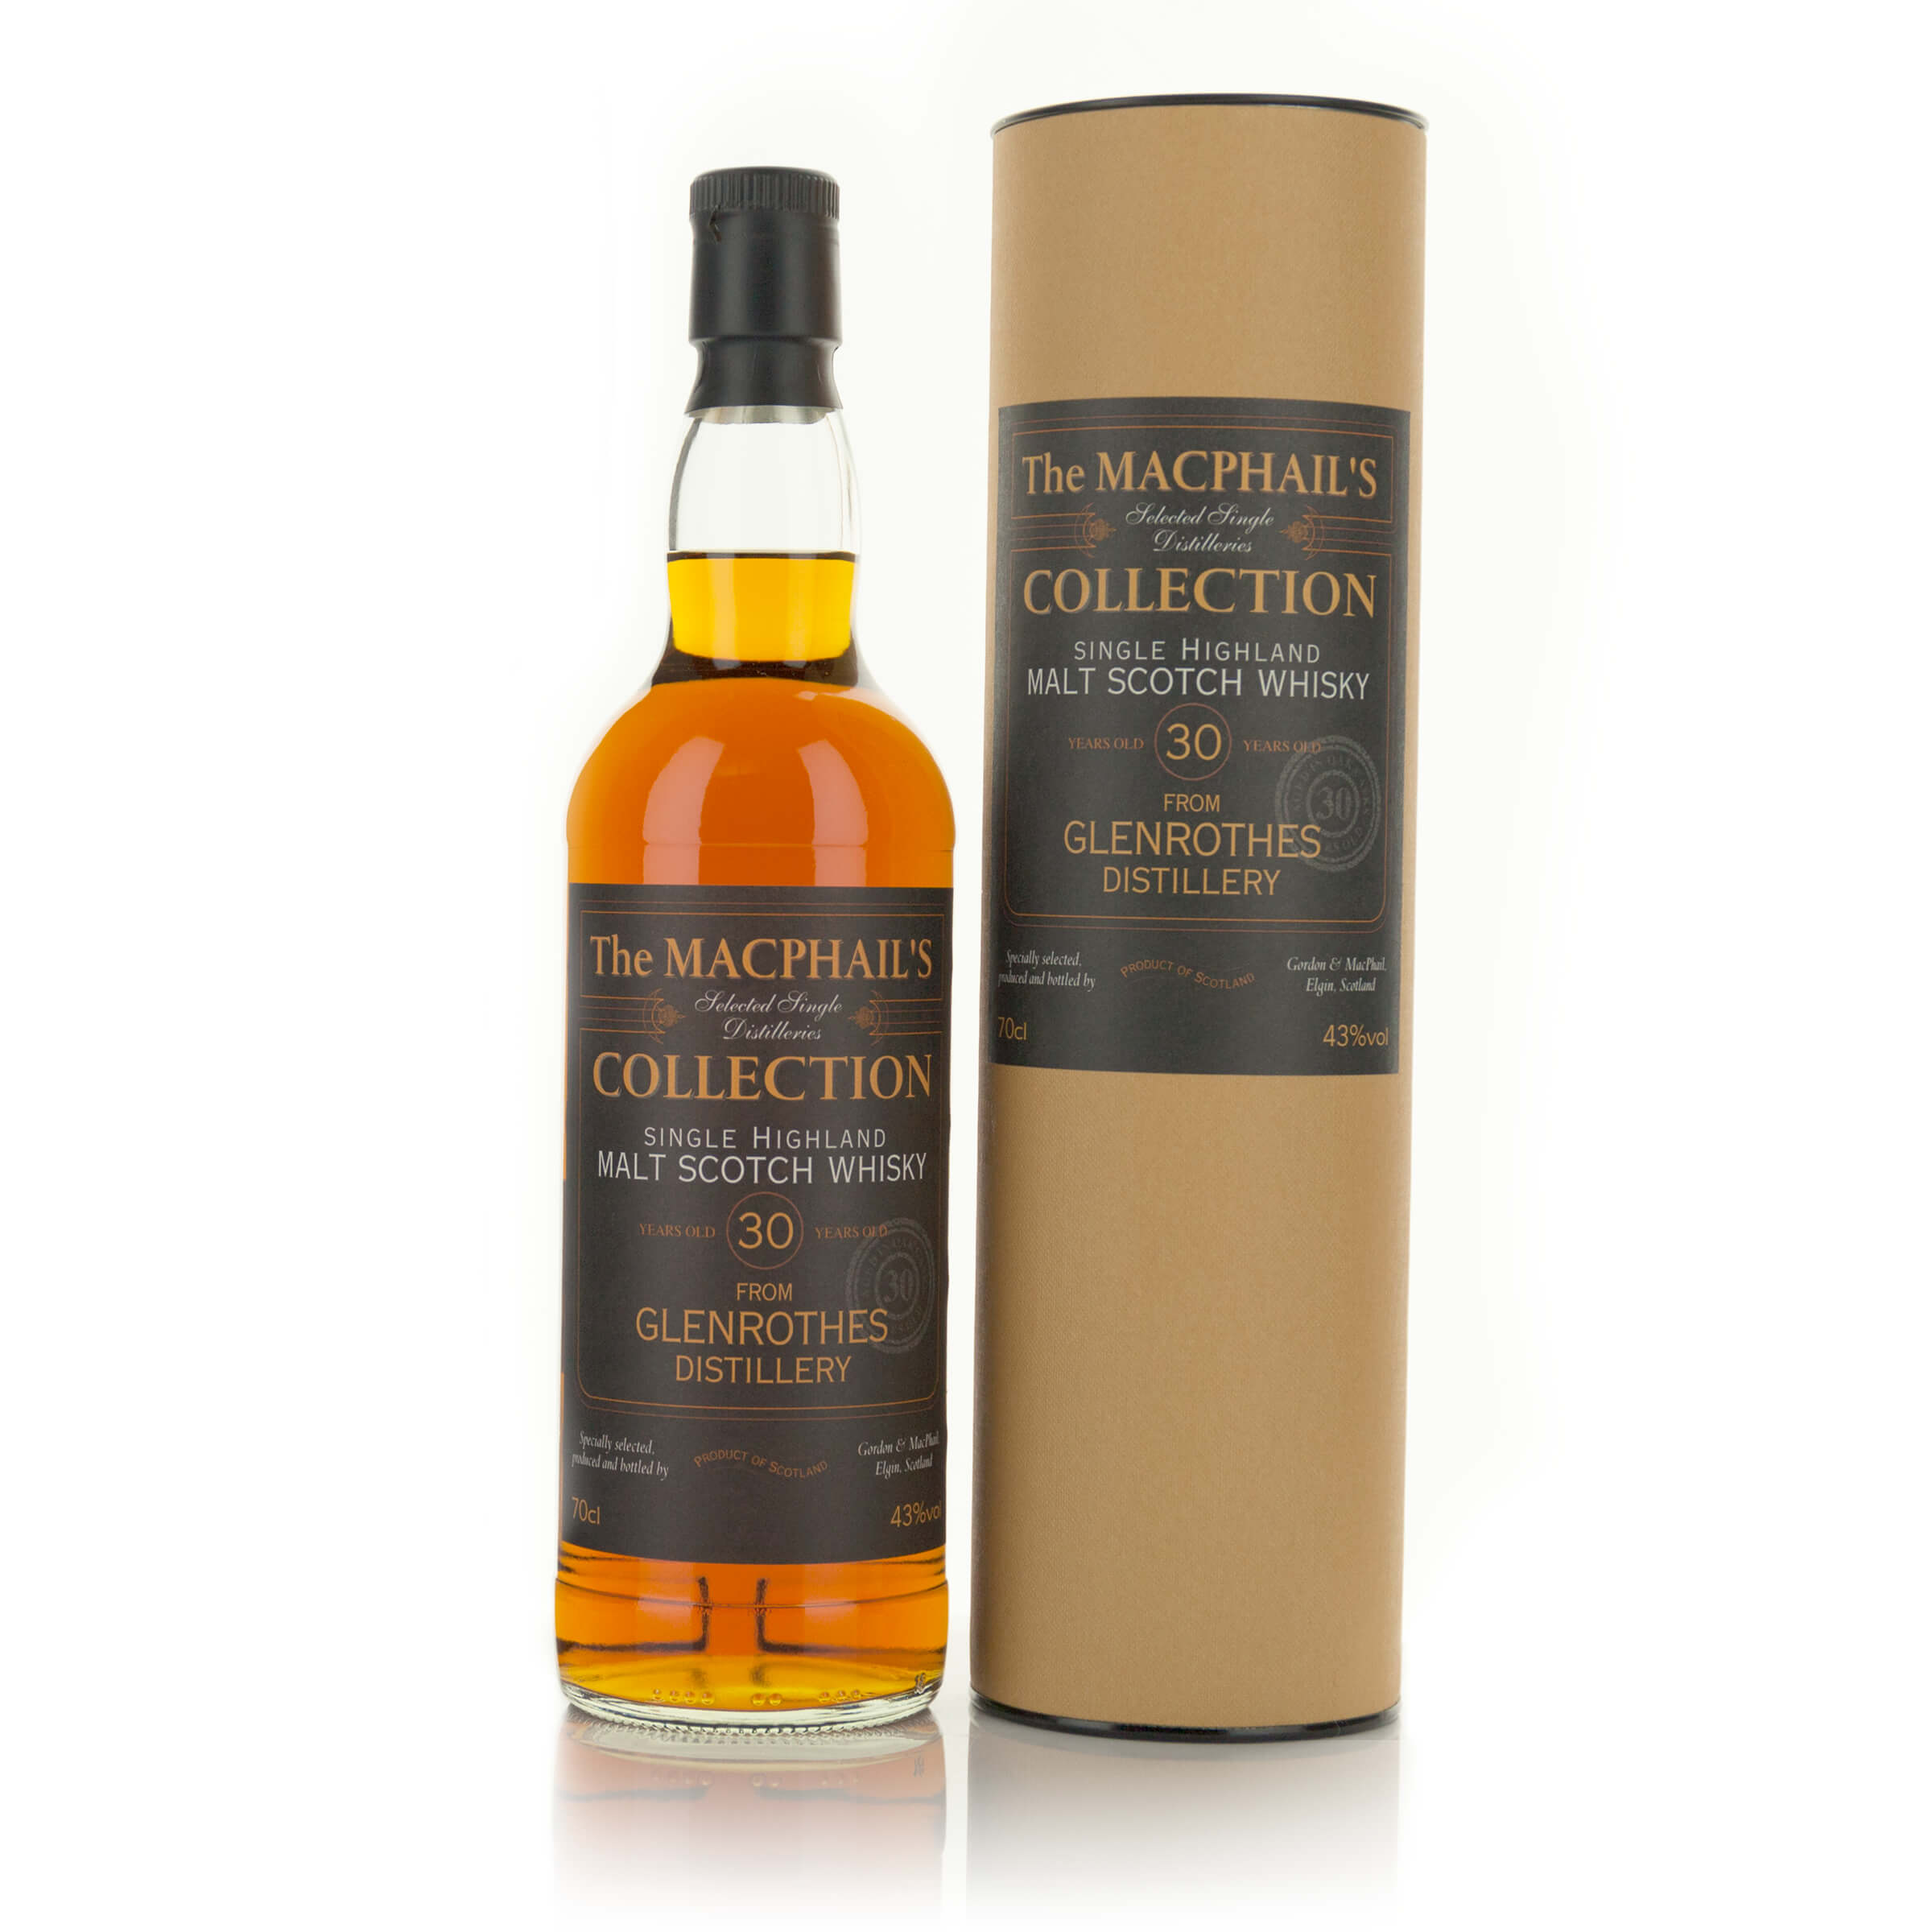 GLENROTHES SINGLE HIGHLAND MALT SCOTCH WHISKY 30 YEARS (ONE 70 CL)